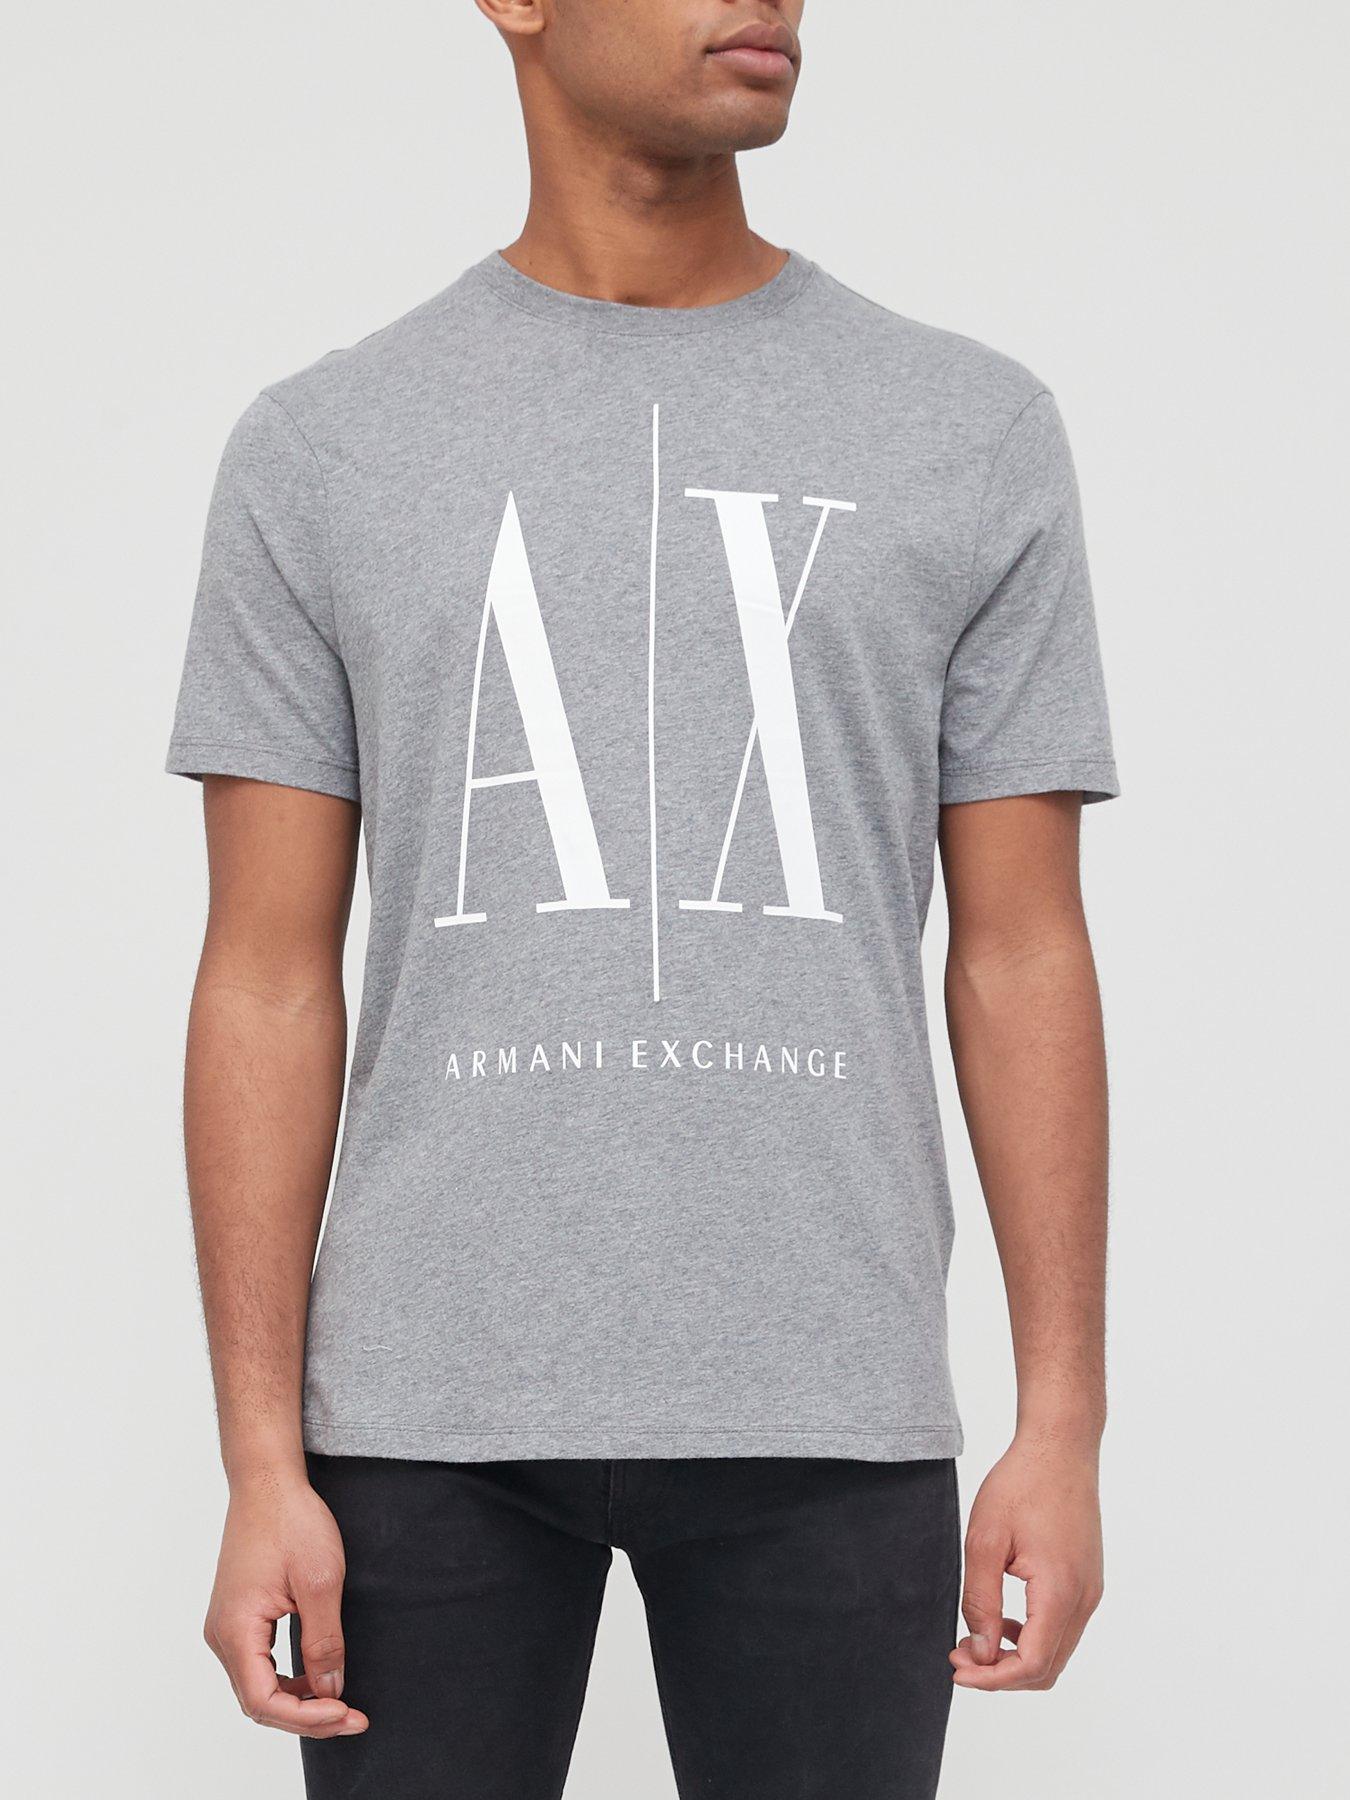 5 | All Black Friday Deals | All Offers | Under 30% | Armani exchange |  